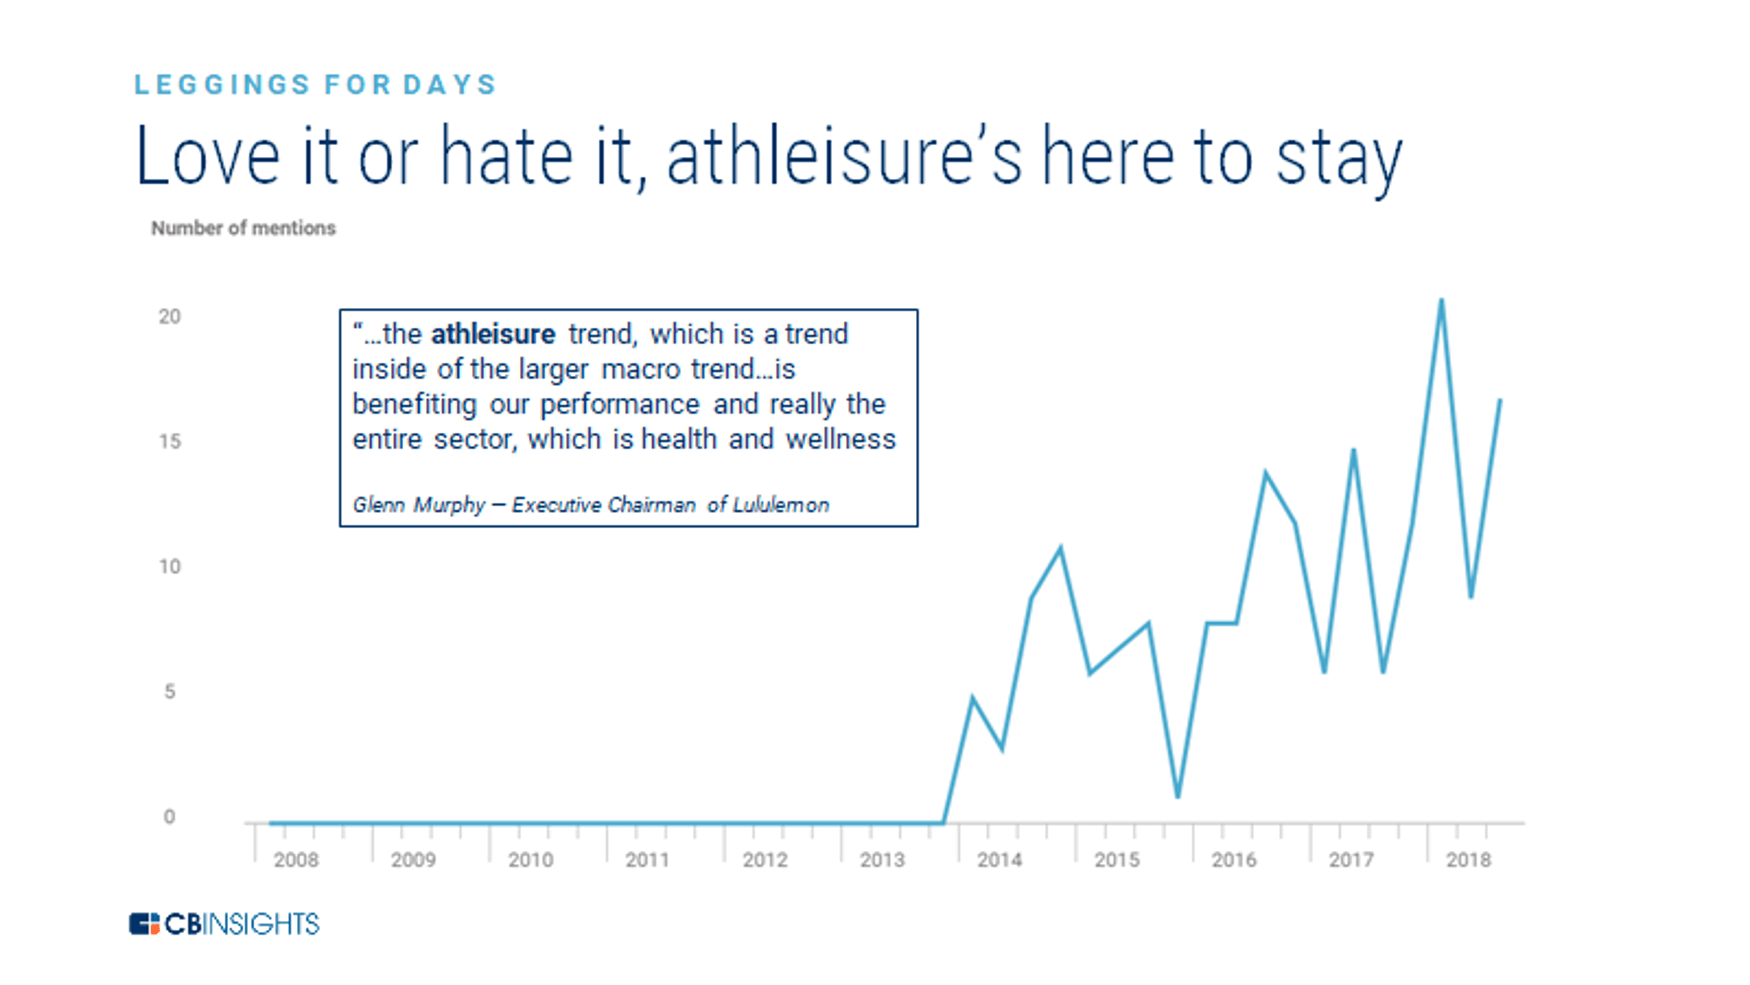 A chart showing how mentions of "athleisure" on earnings calls have surged since 2014.